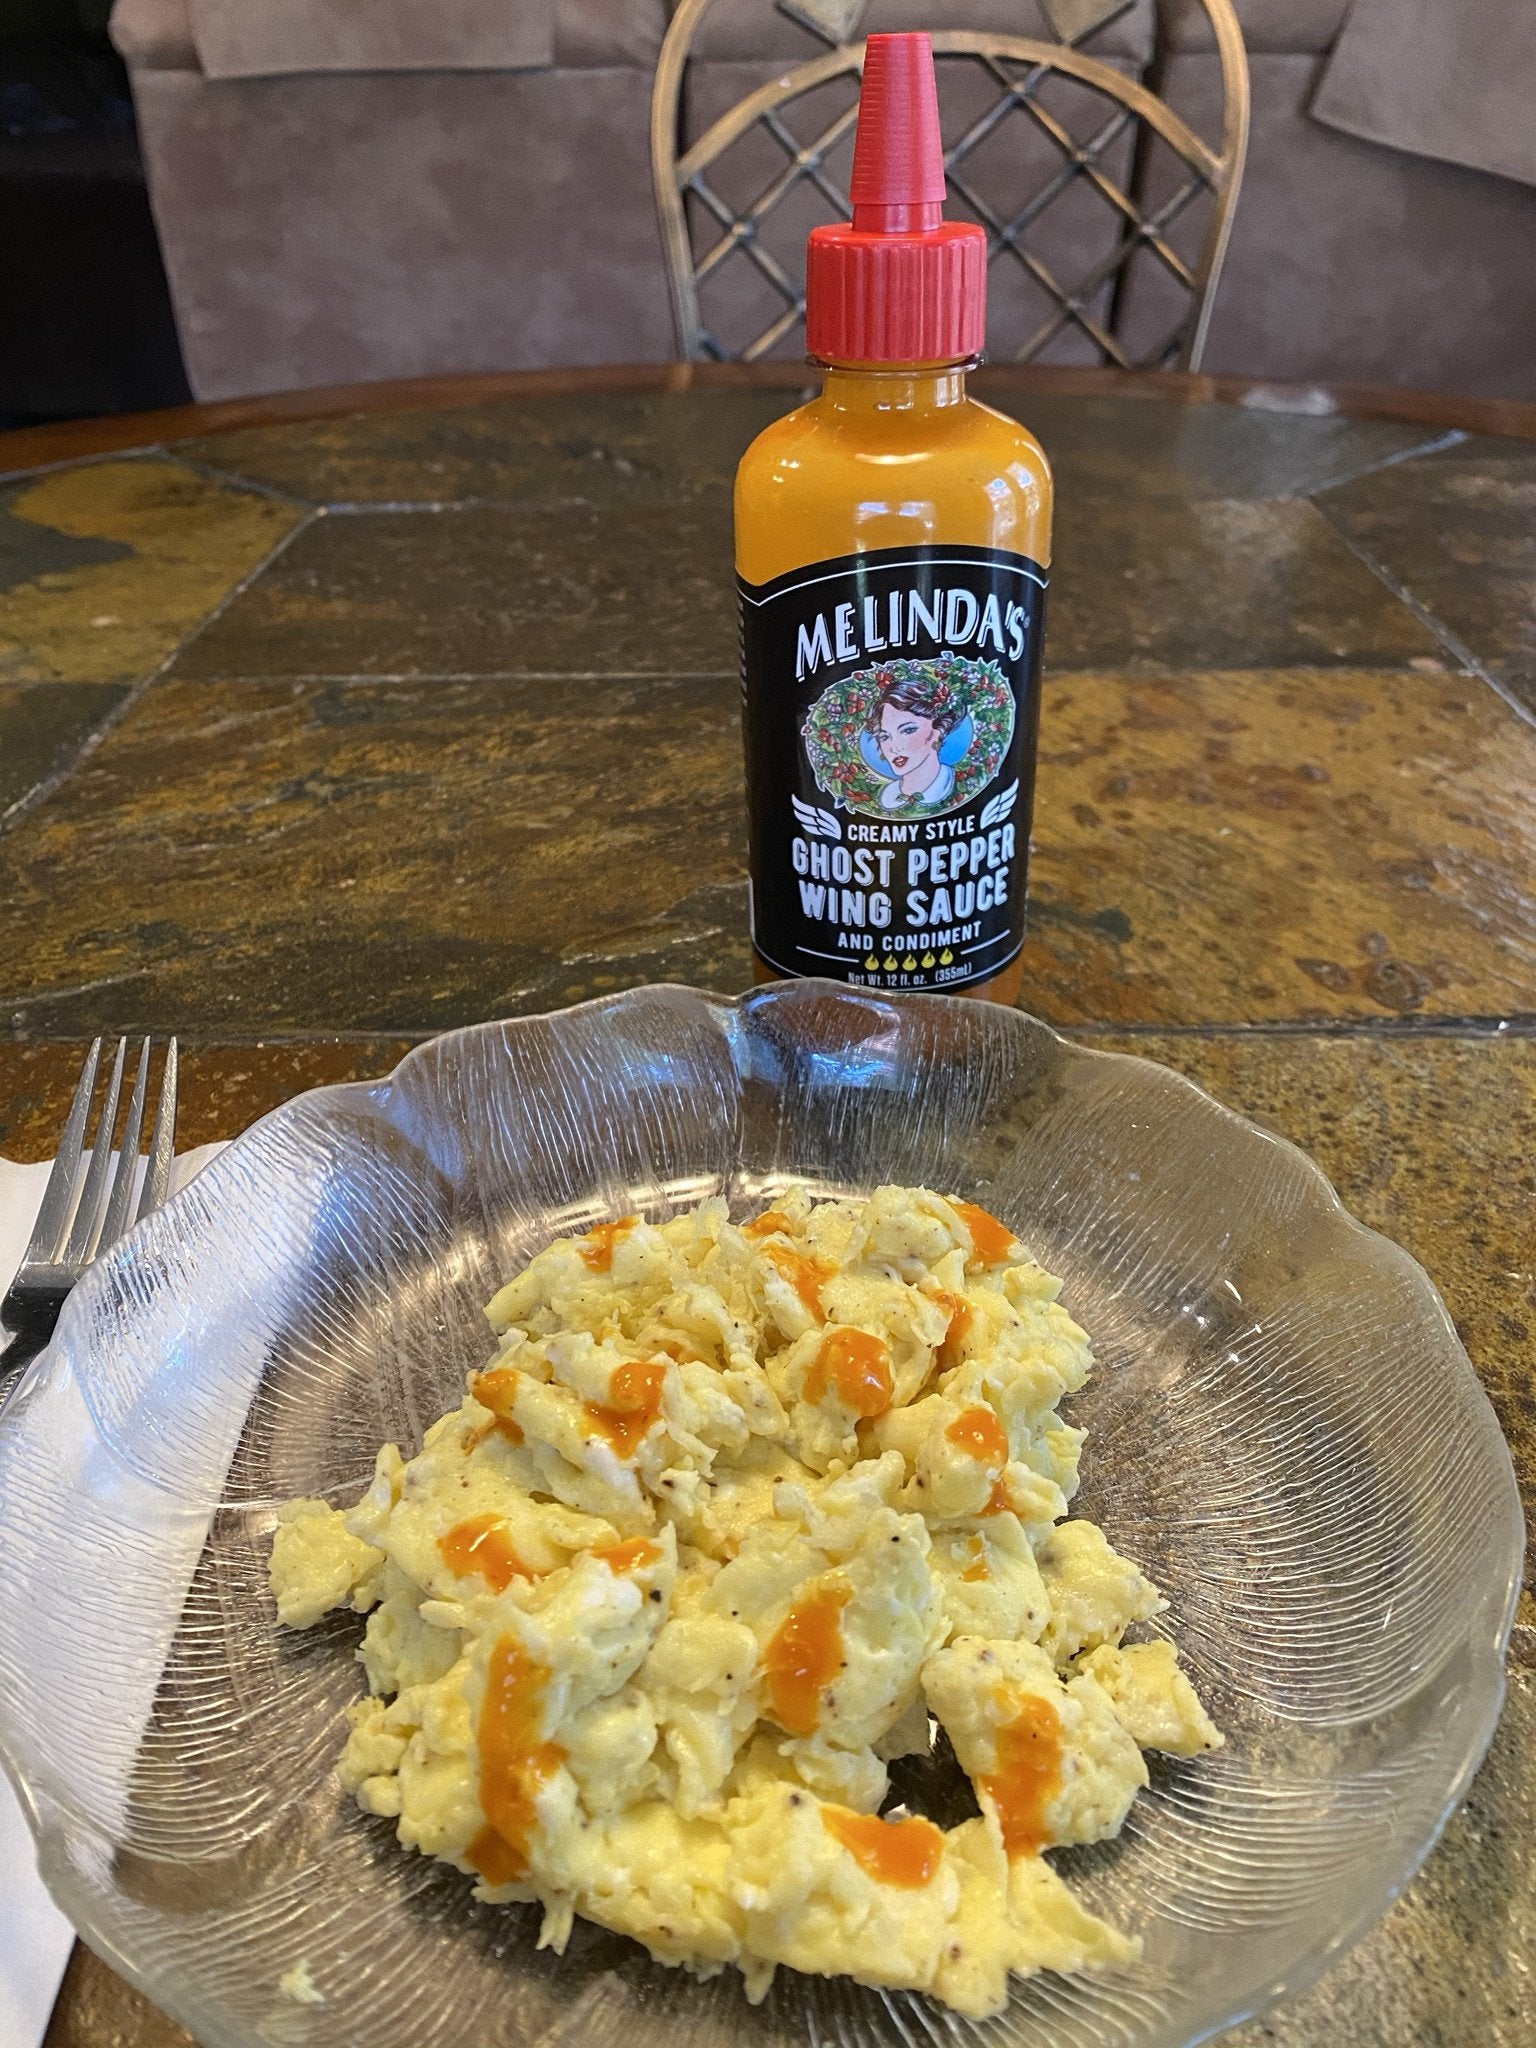 Hands down, the best hot sauce for scrambled eggs! : spicy